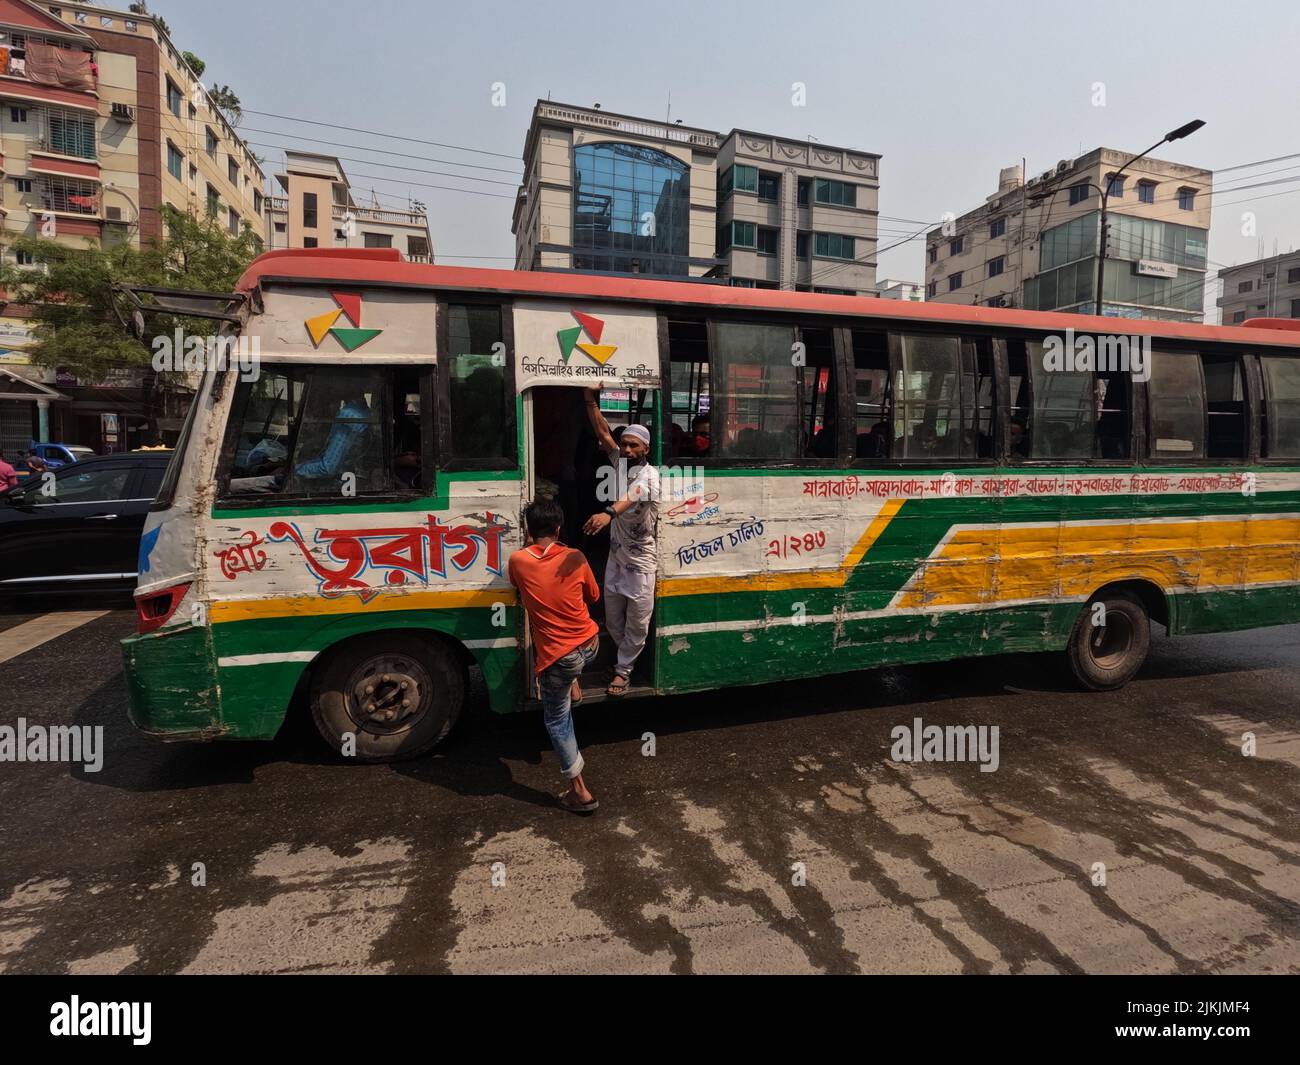 A beautiful shot of a male trying to enter a colorful transport bus in the street in Dhaka, Bangladesh Stock Photo